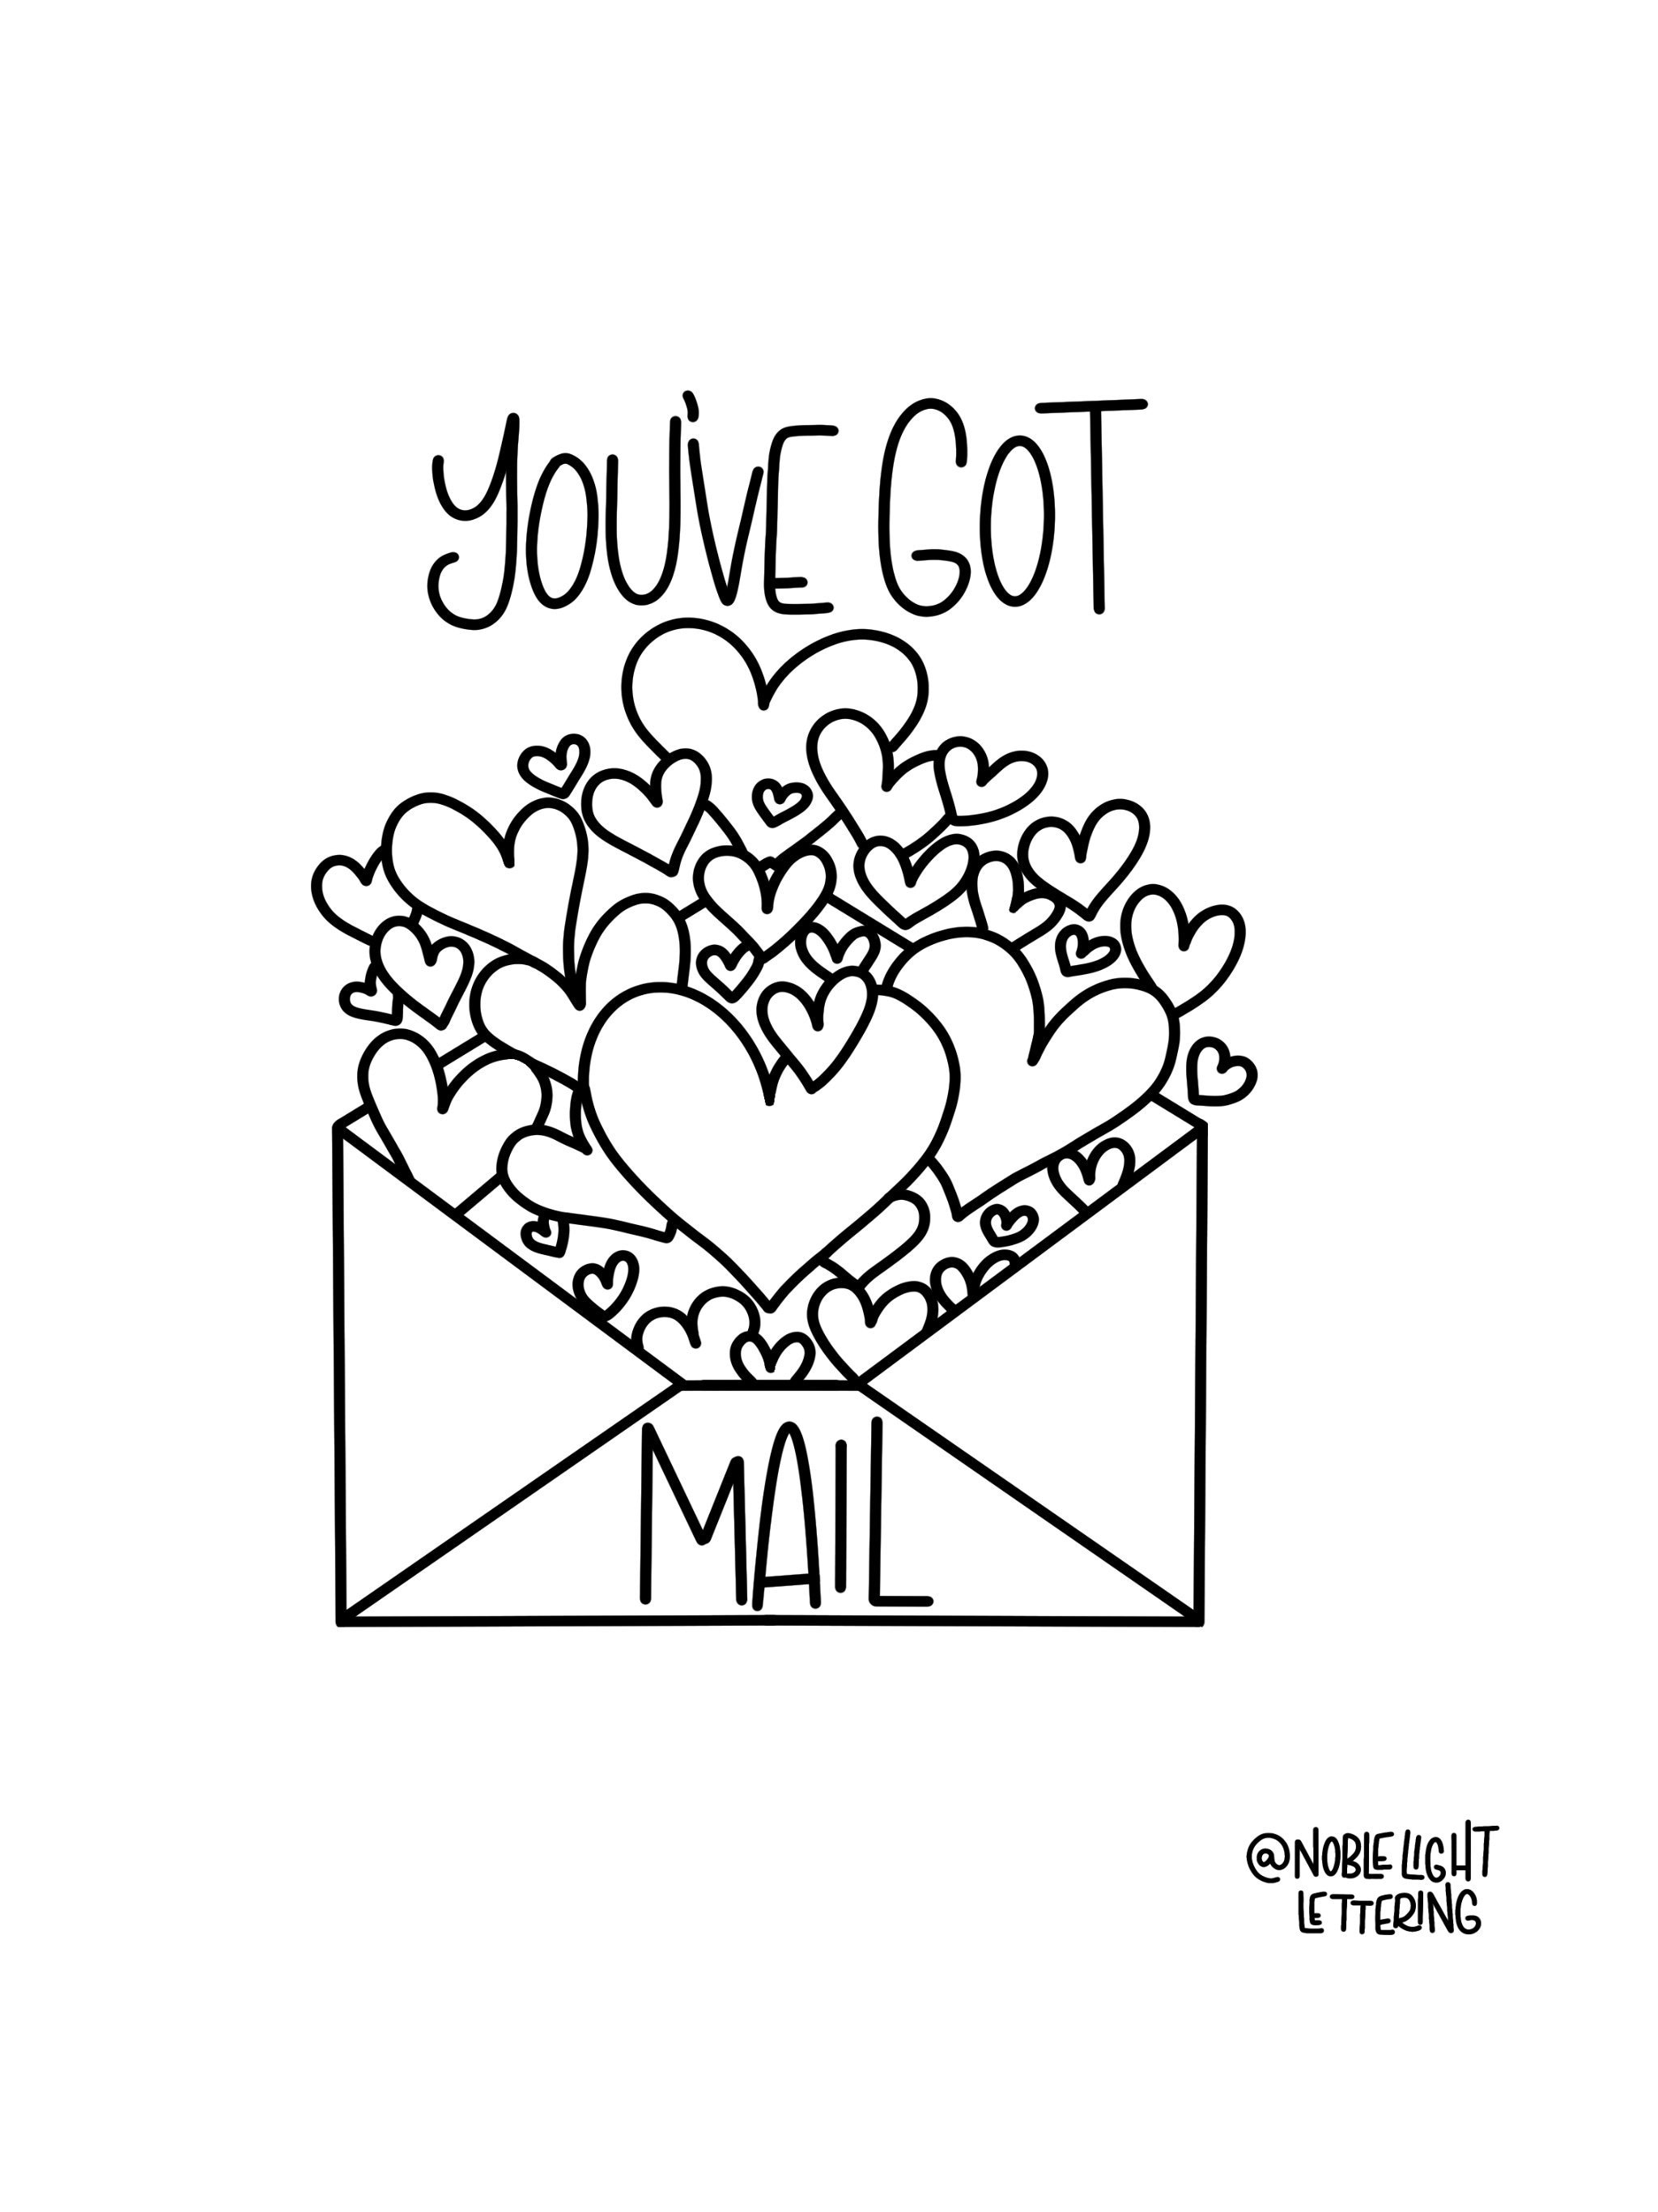 Youve got mail coloring page